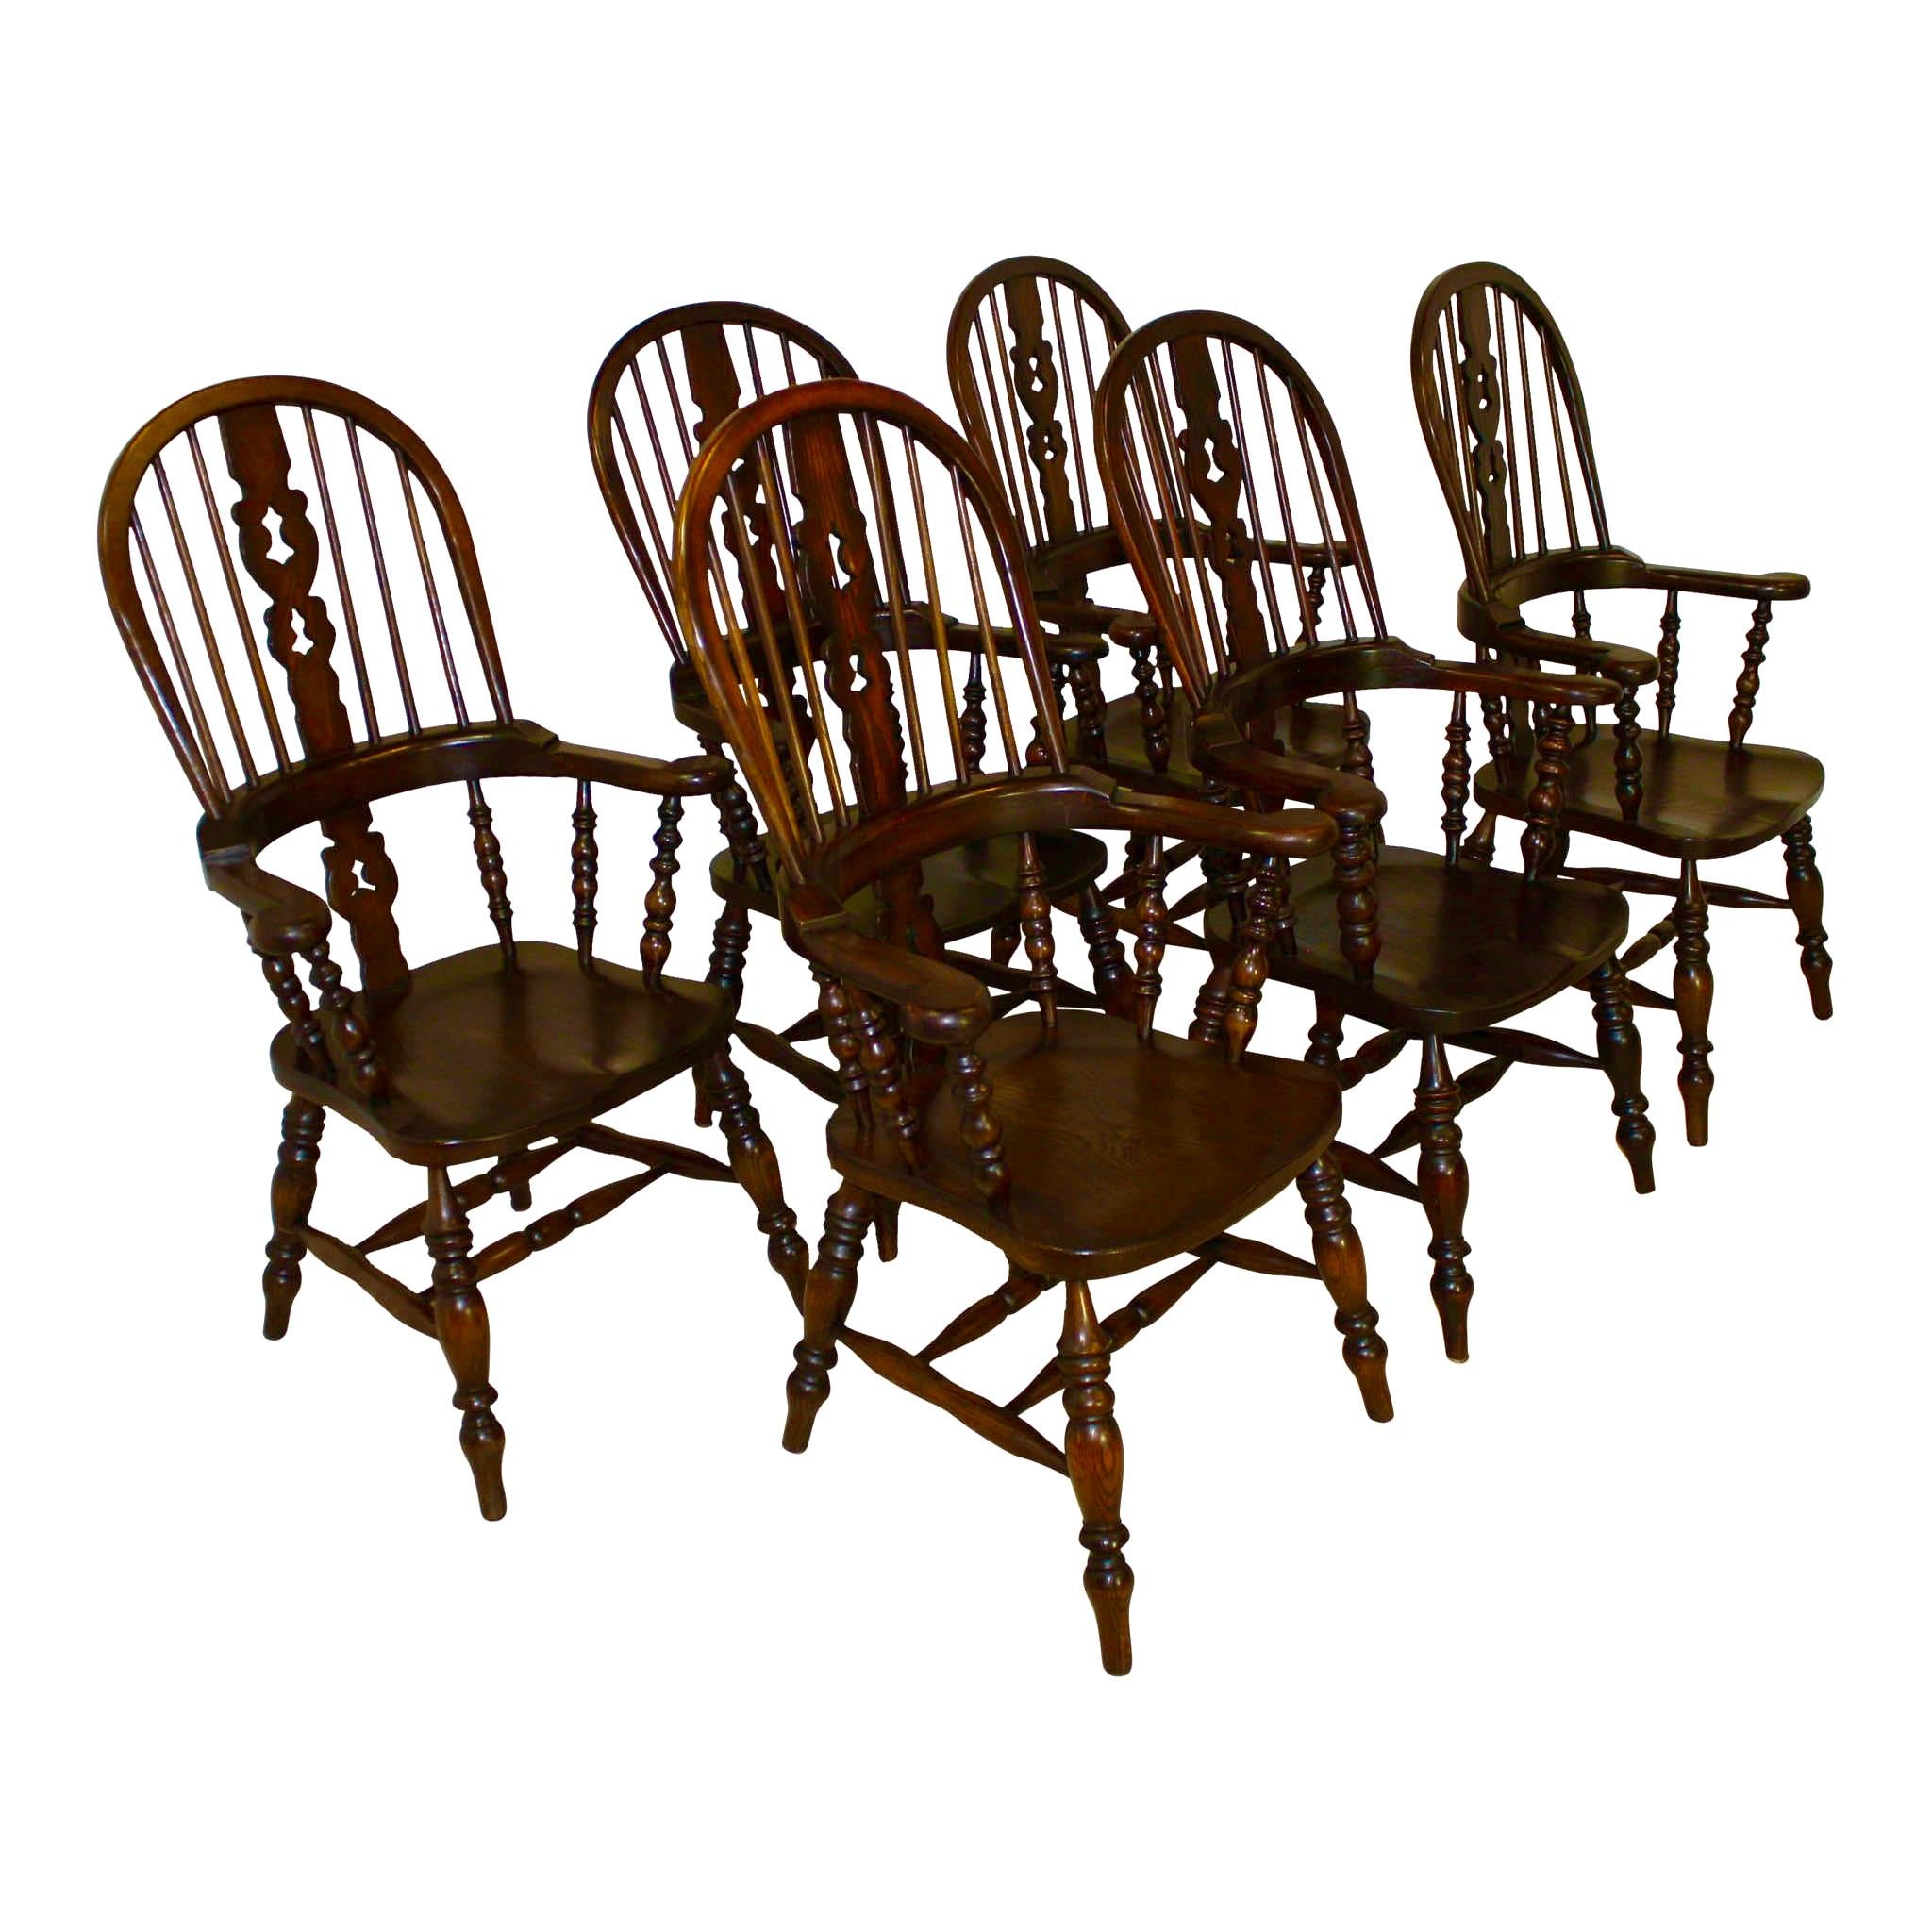 This exceptional set consists of six substantial Windsor armchairs with pierced splat backs, wide arms, and saddle-style seats. Traditional, slender, upper spindles are joined to the high, hooped backs and continuous arm rails. Lower spindles and